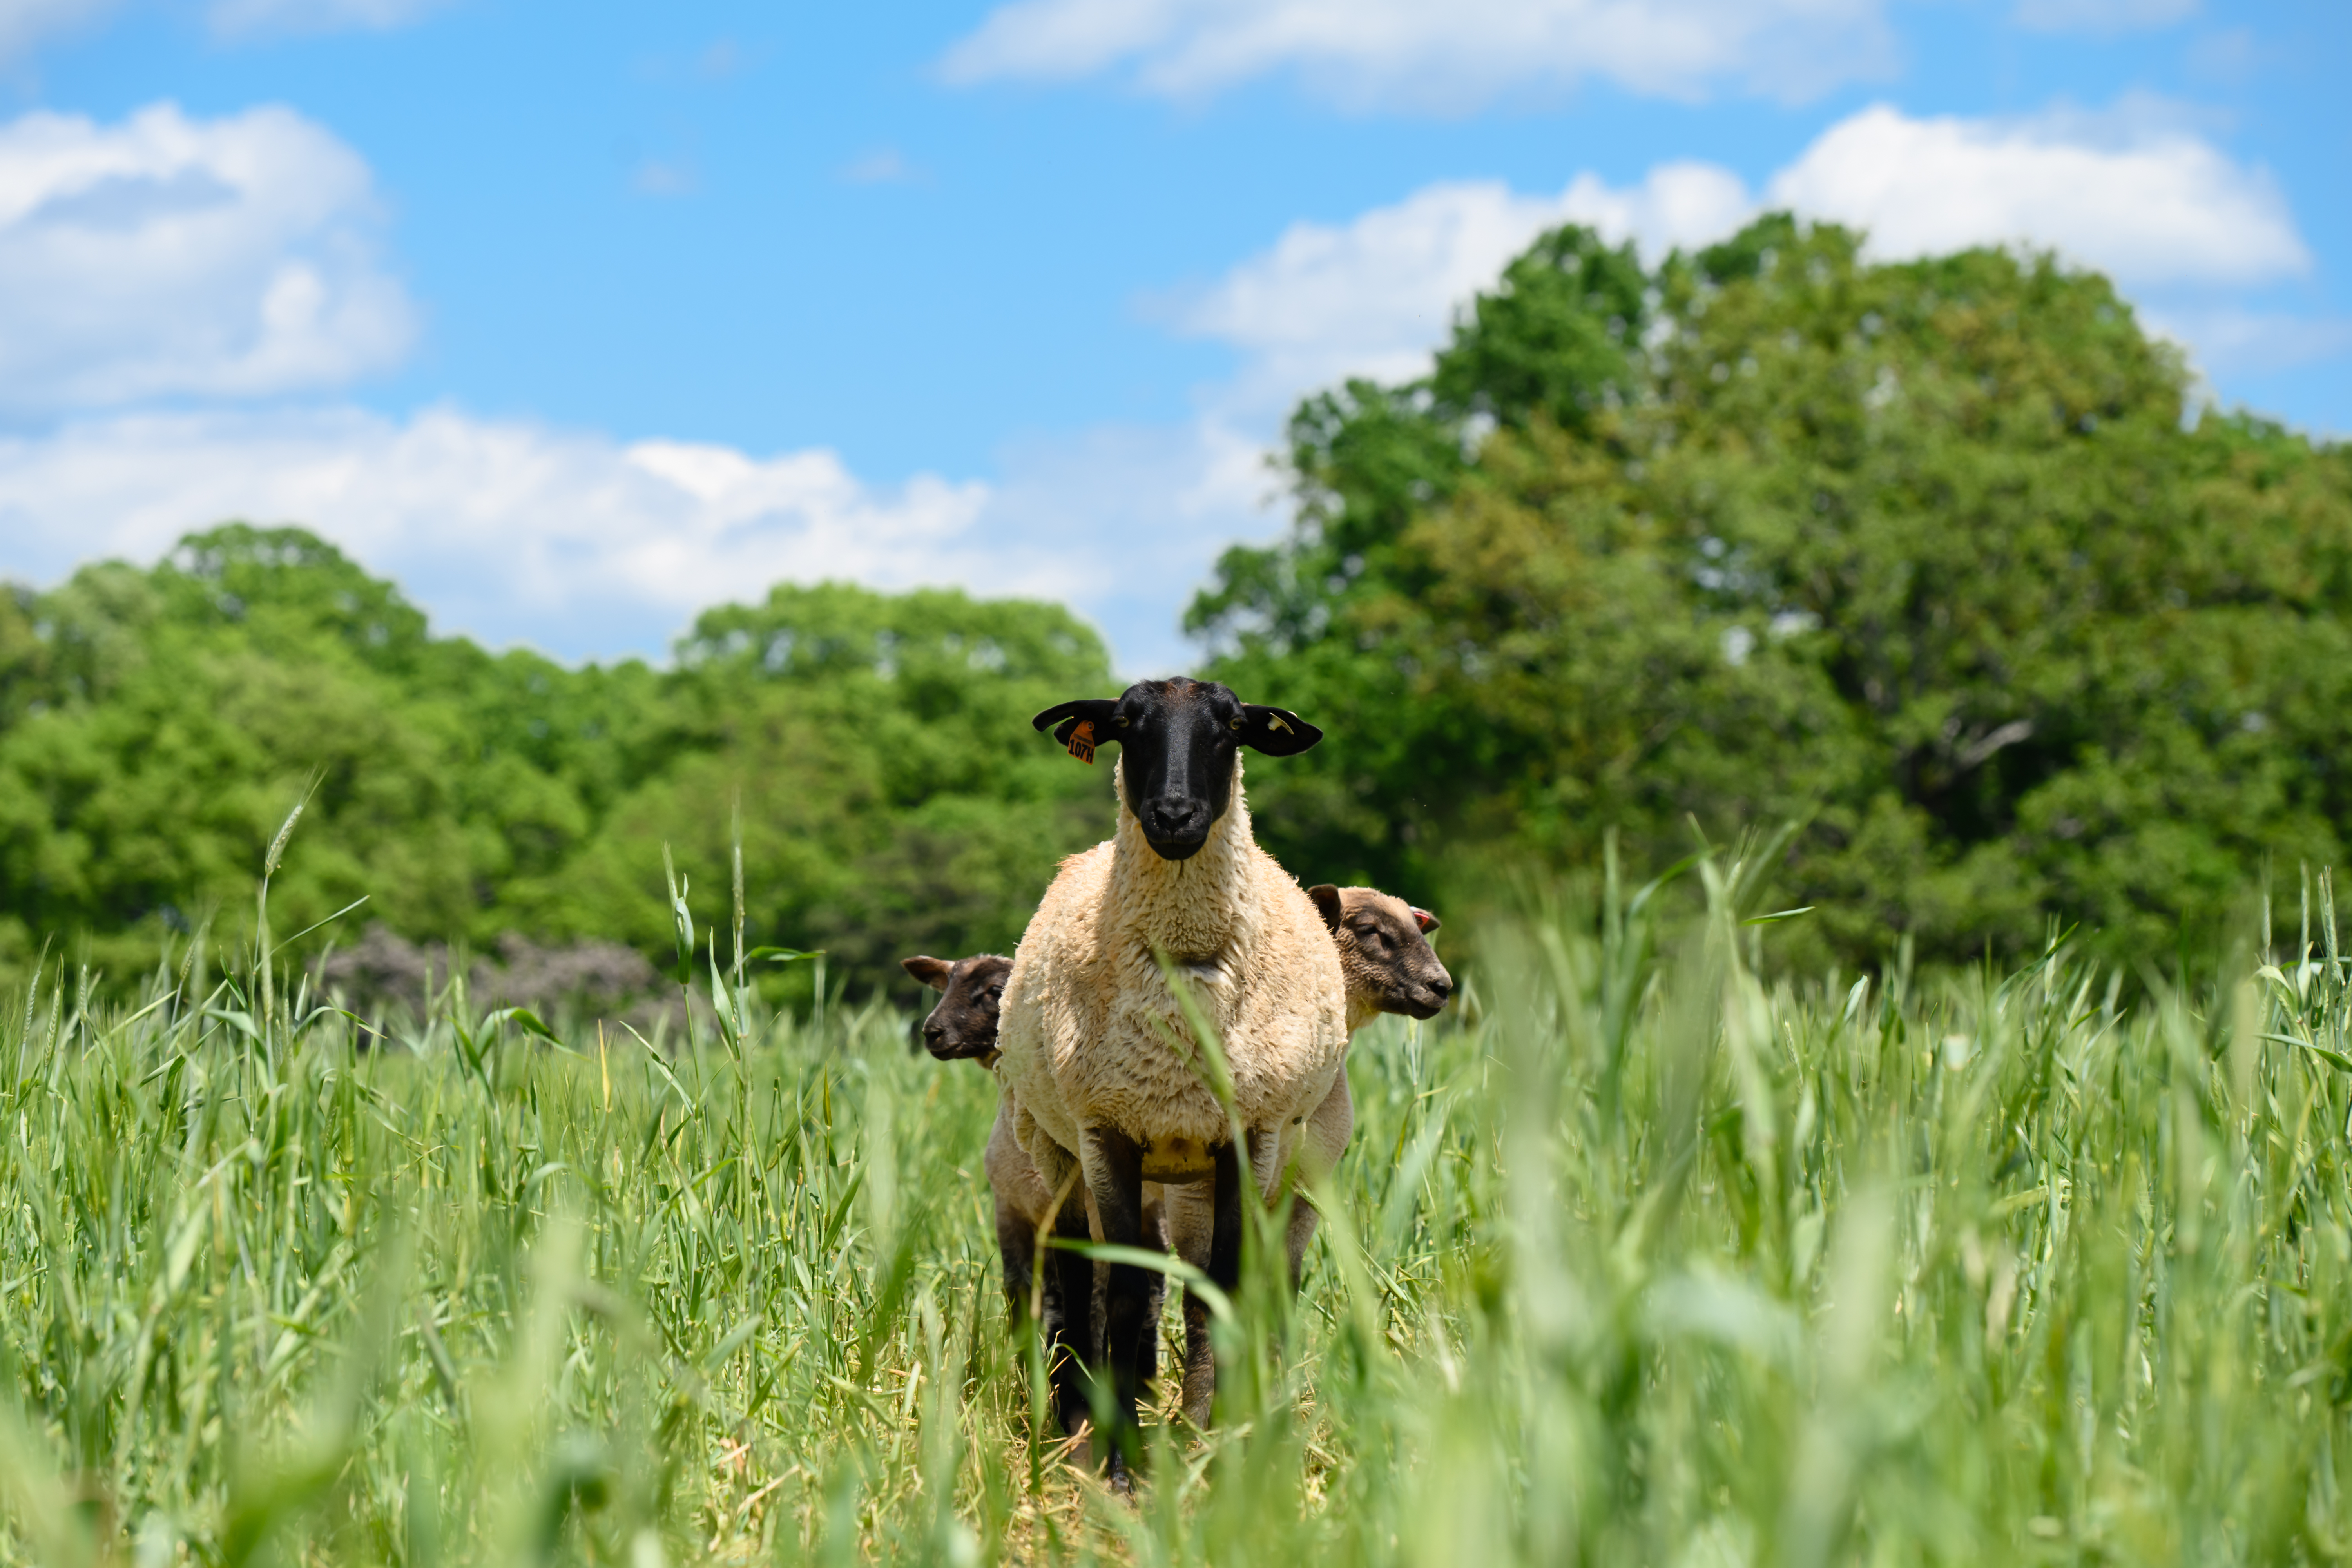 Adult female sheep with her lambs standing in a lush green field.